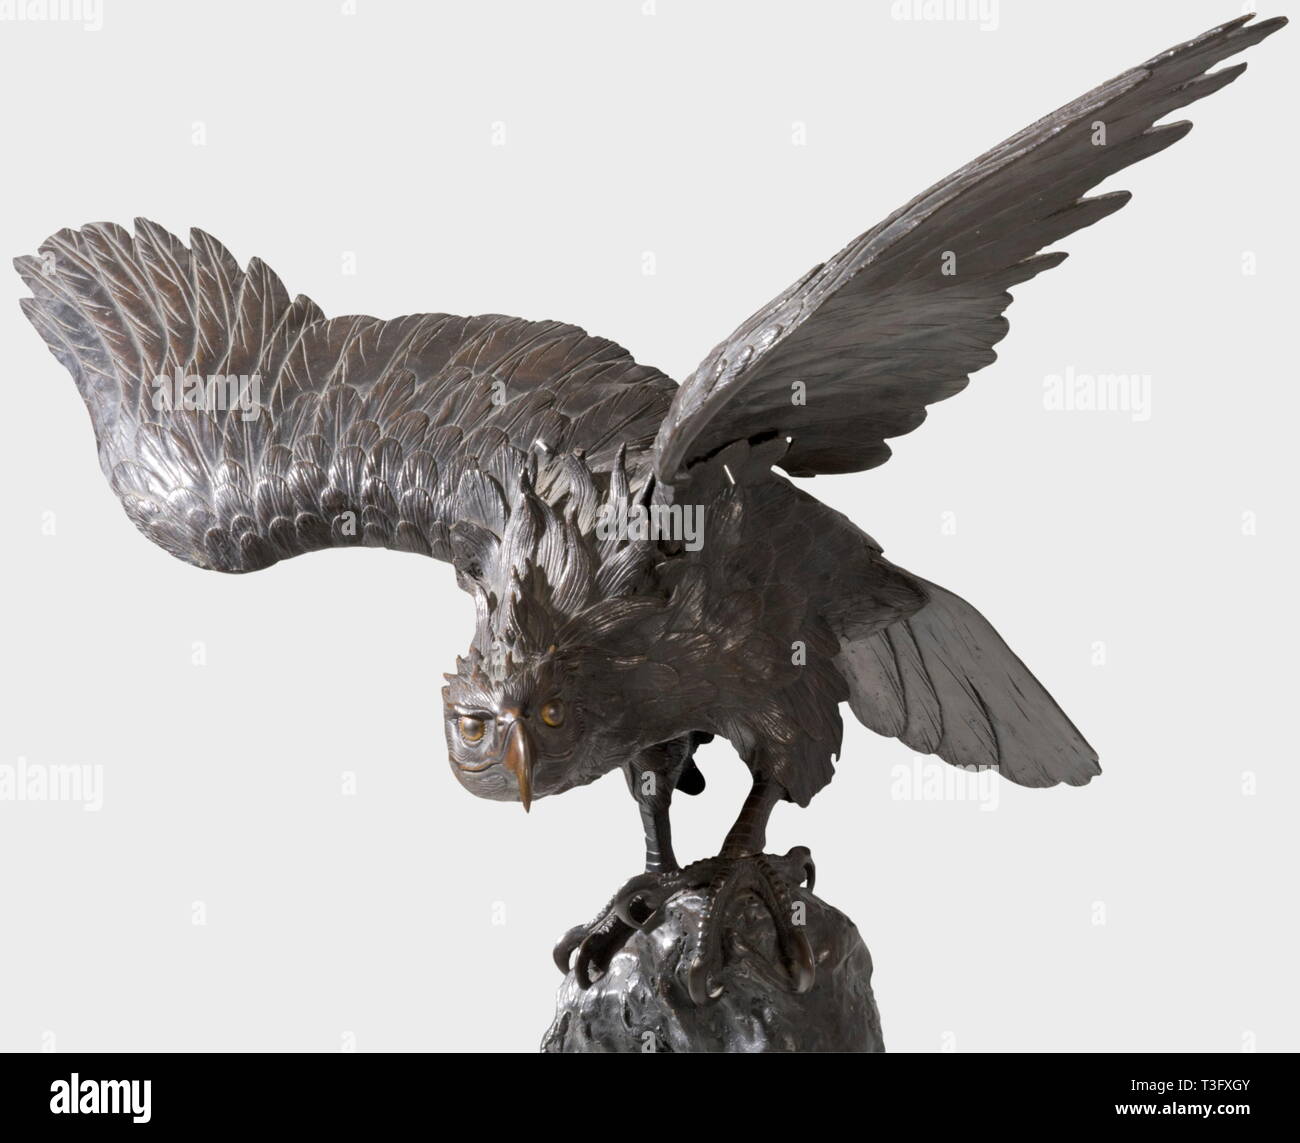 An eagle taking flight, Bronze sculpture, Japan, 2nd half of the 19th century. Eagle with spread wings perched on a rock. Dark patinated bronze cast, made of several parts, very finely worked. Height 76 cm, wing span 83 cm. Wing tips slightly damaged, tail slightly bent. Unsigned. historic, historical, 19th century, Japanese, Asian, Asia, Far East, object, objects, stills, clipping, clippings, cut out, cut-out, cut-outs, sculpture, sculptures, statuette, figurine, figurines, statuettes, fine arts, art, Additional-Rights-Clearance-Info-Not-Available Stock Photo